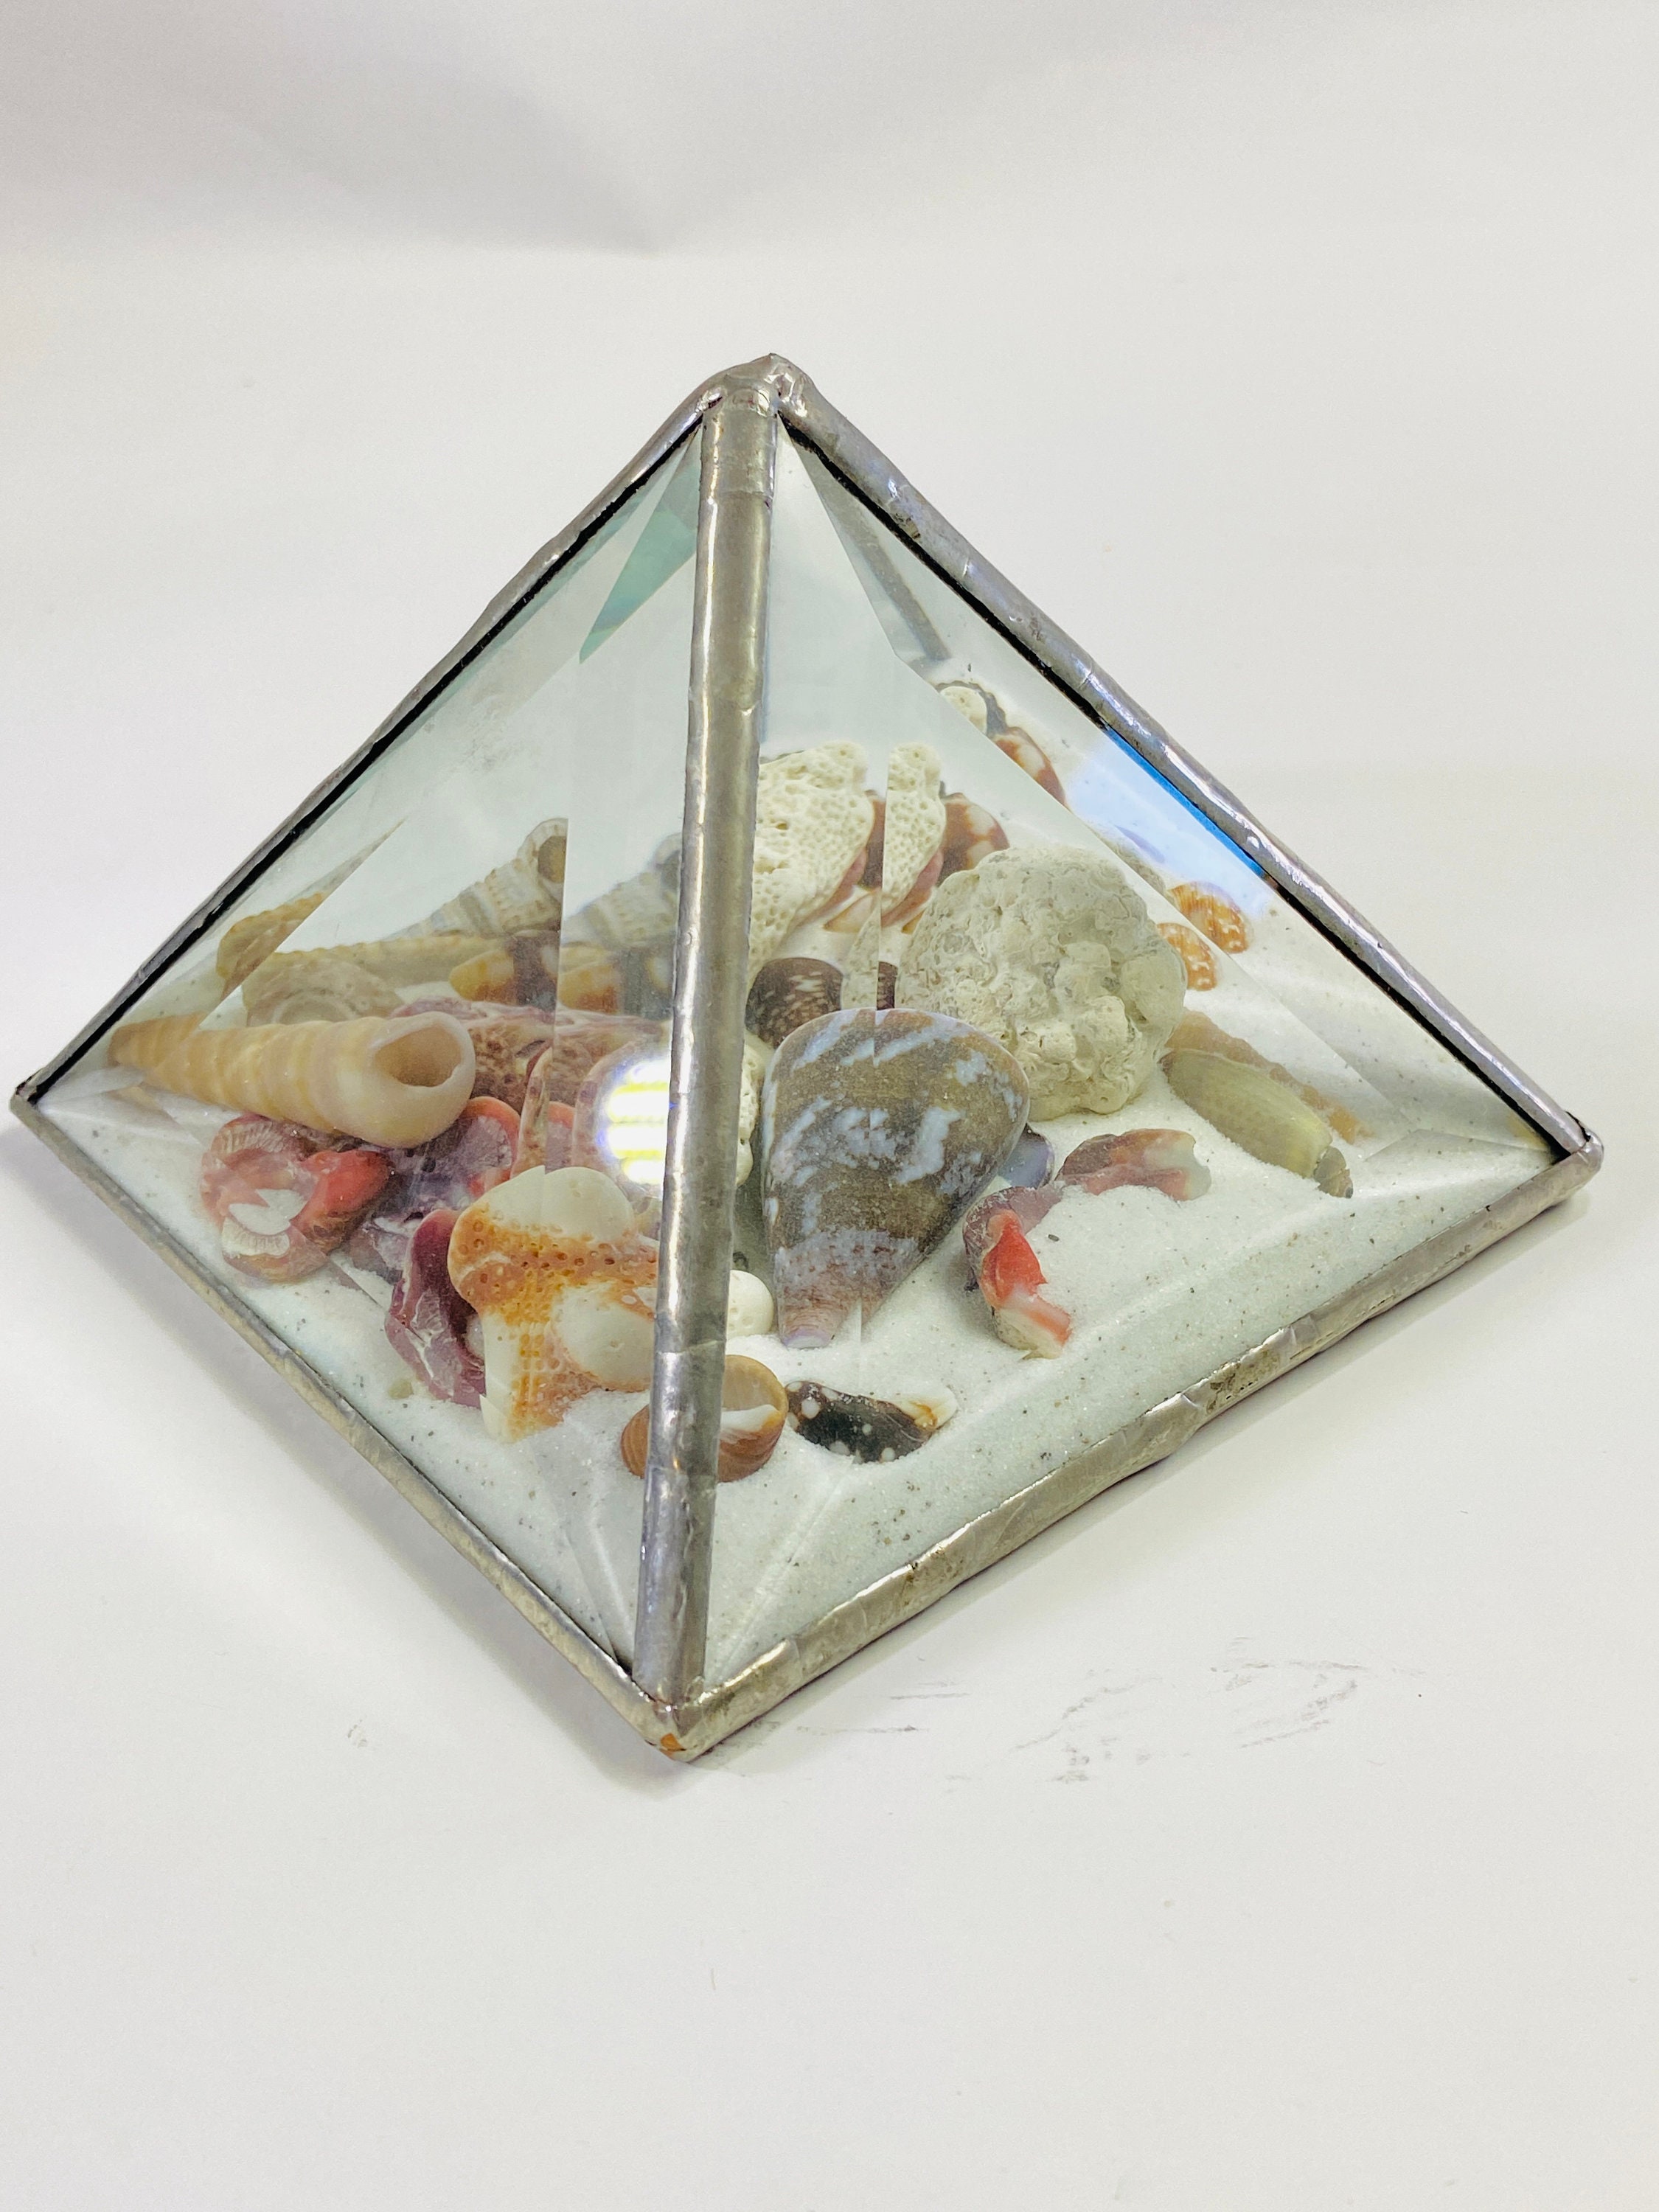 Sand Sculpture Office Decor Beveled Pyramid Stained Glass Decoration